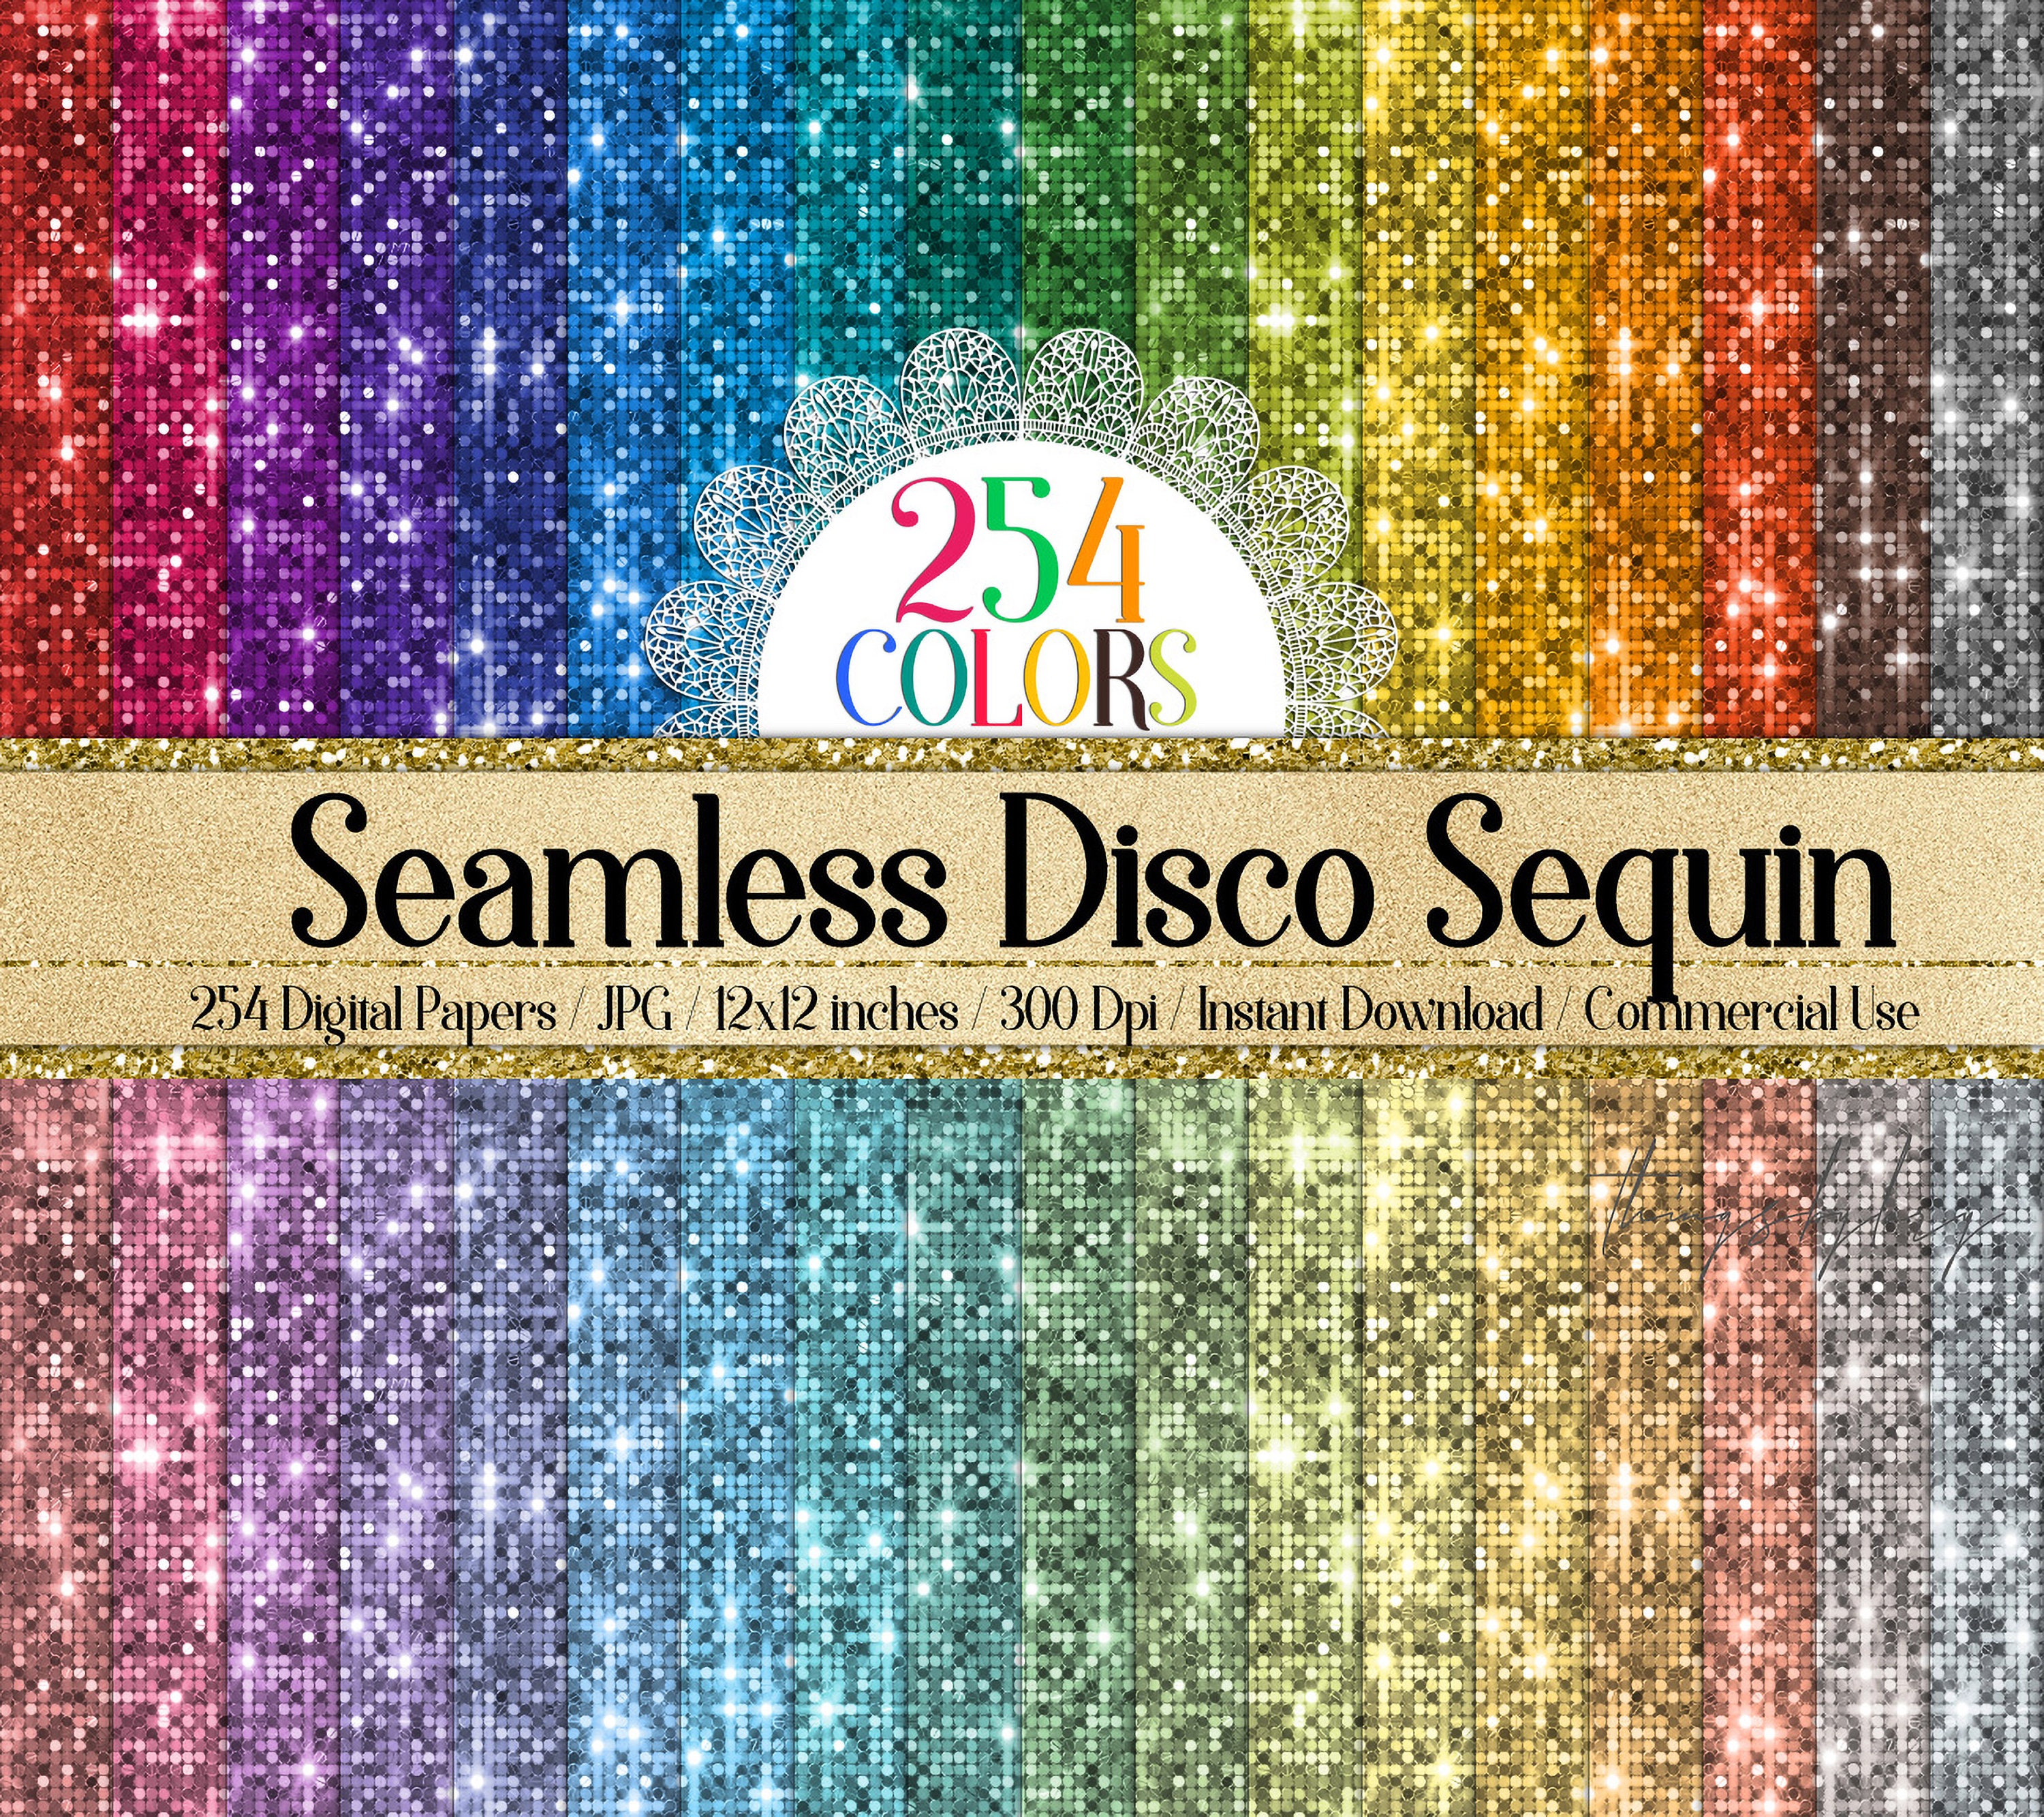 Round Sequins Sewing & Knitting Round Sequins